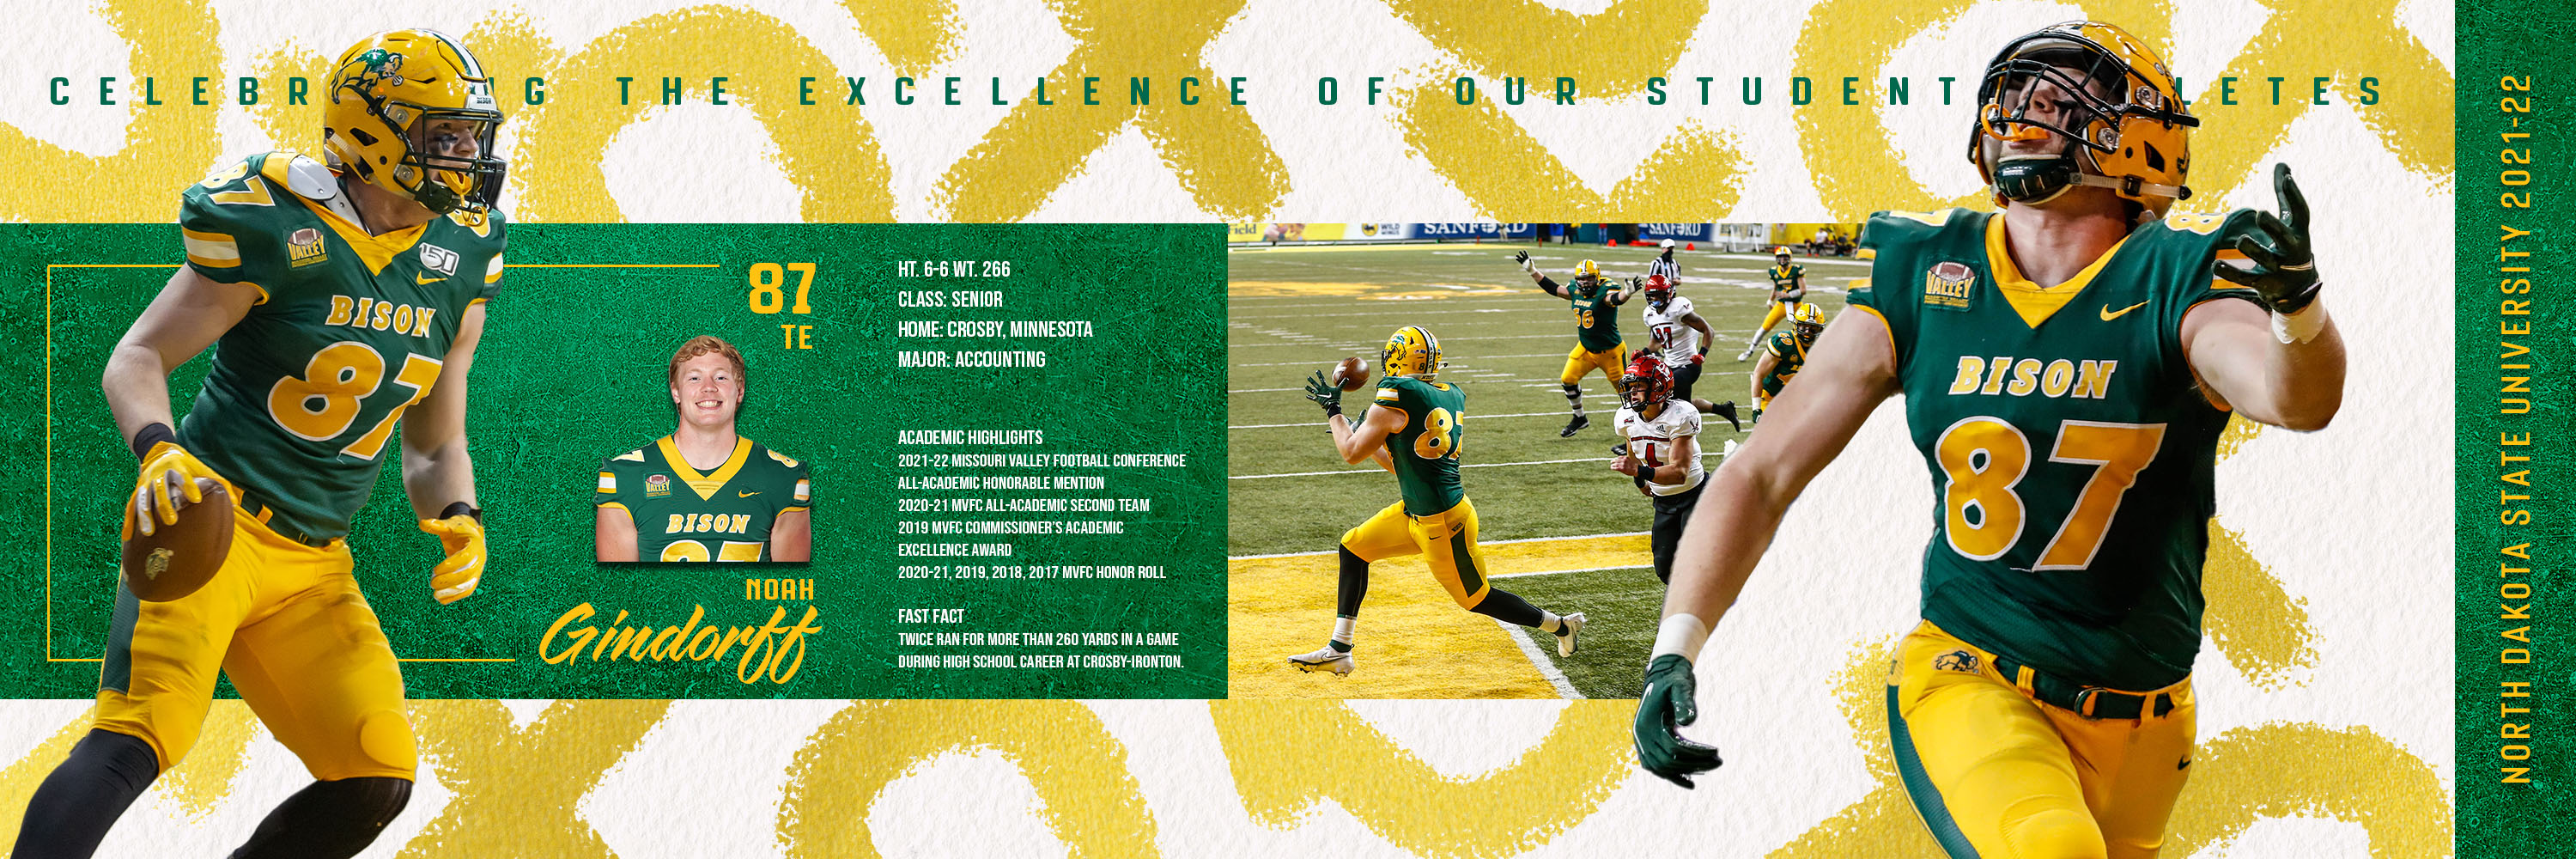 Celebrating The Academic Excellence Of Our Student-Athletes | North Dakota  State University